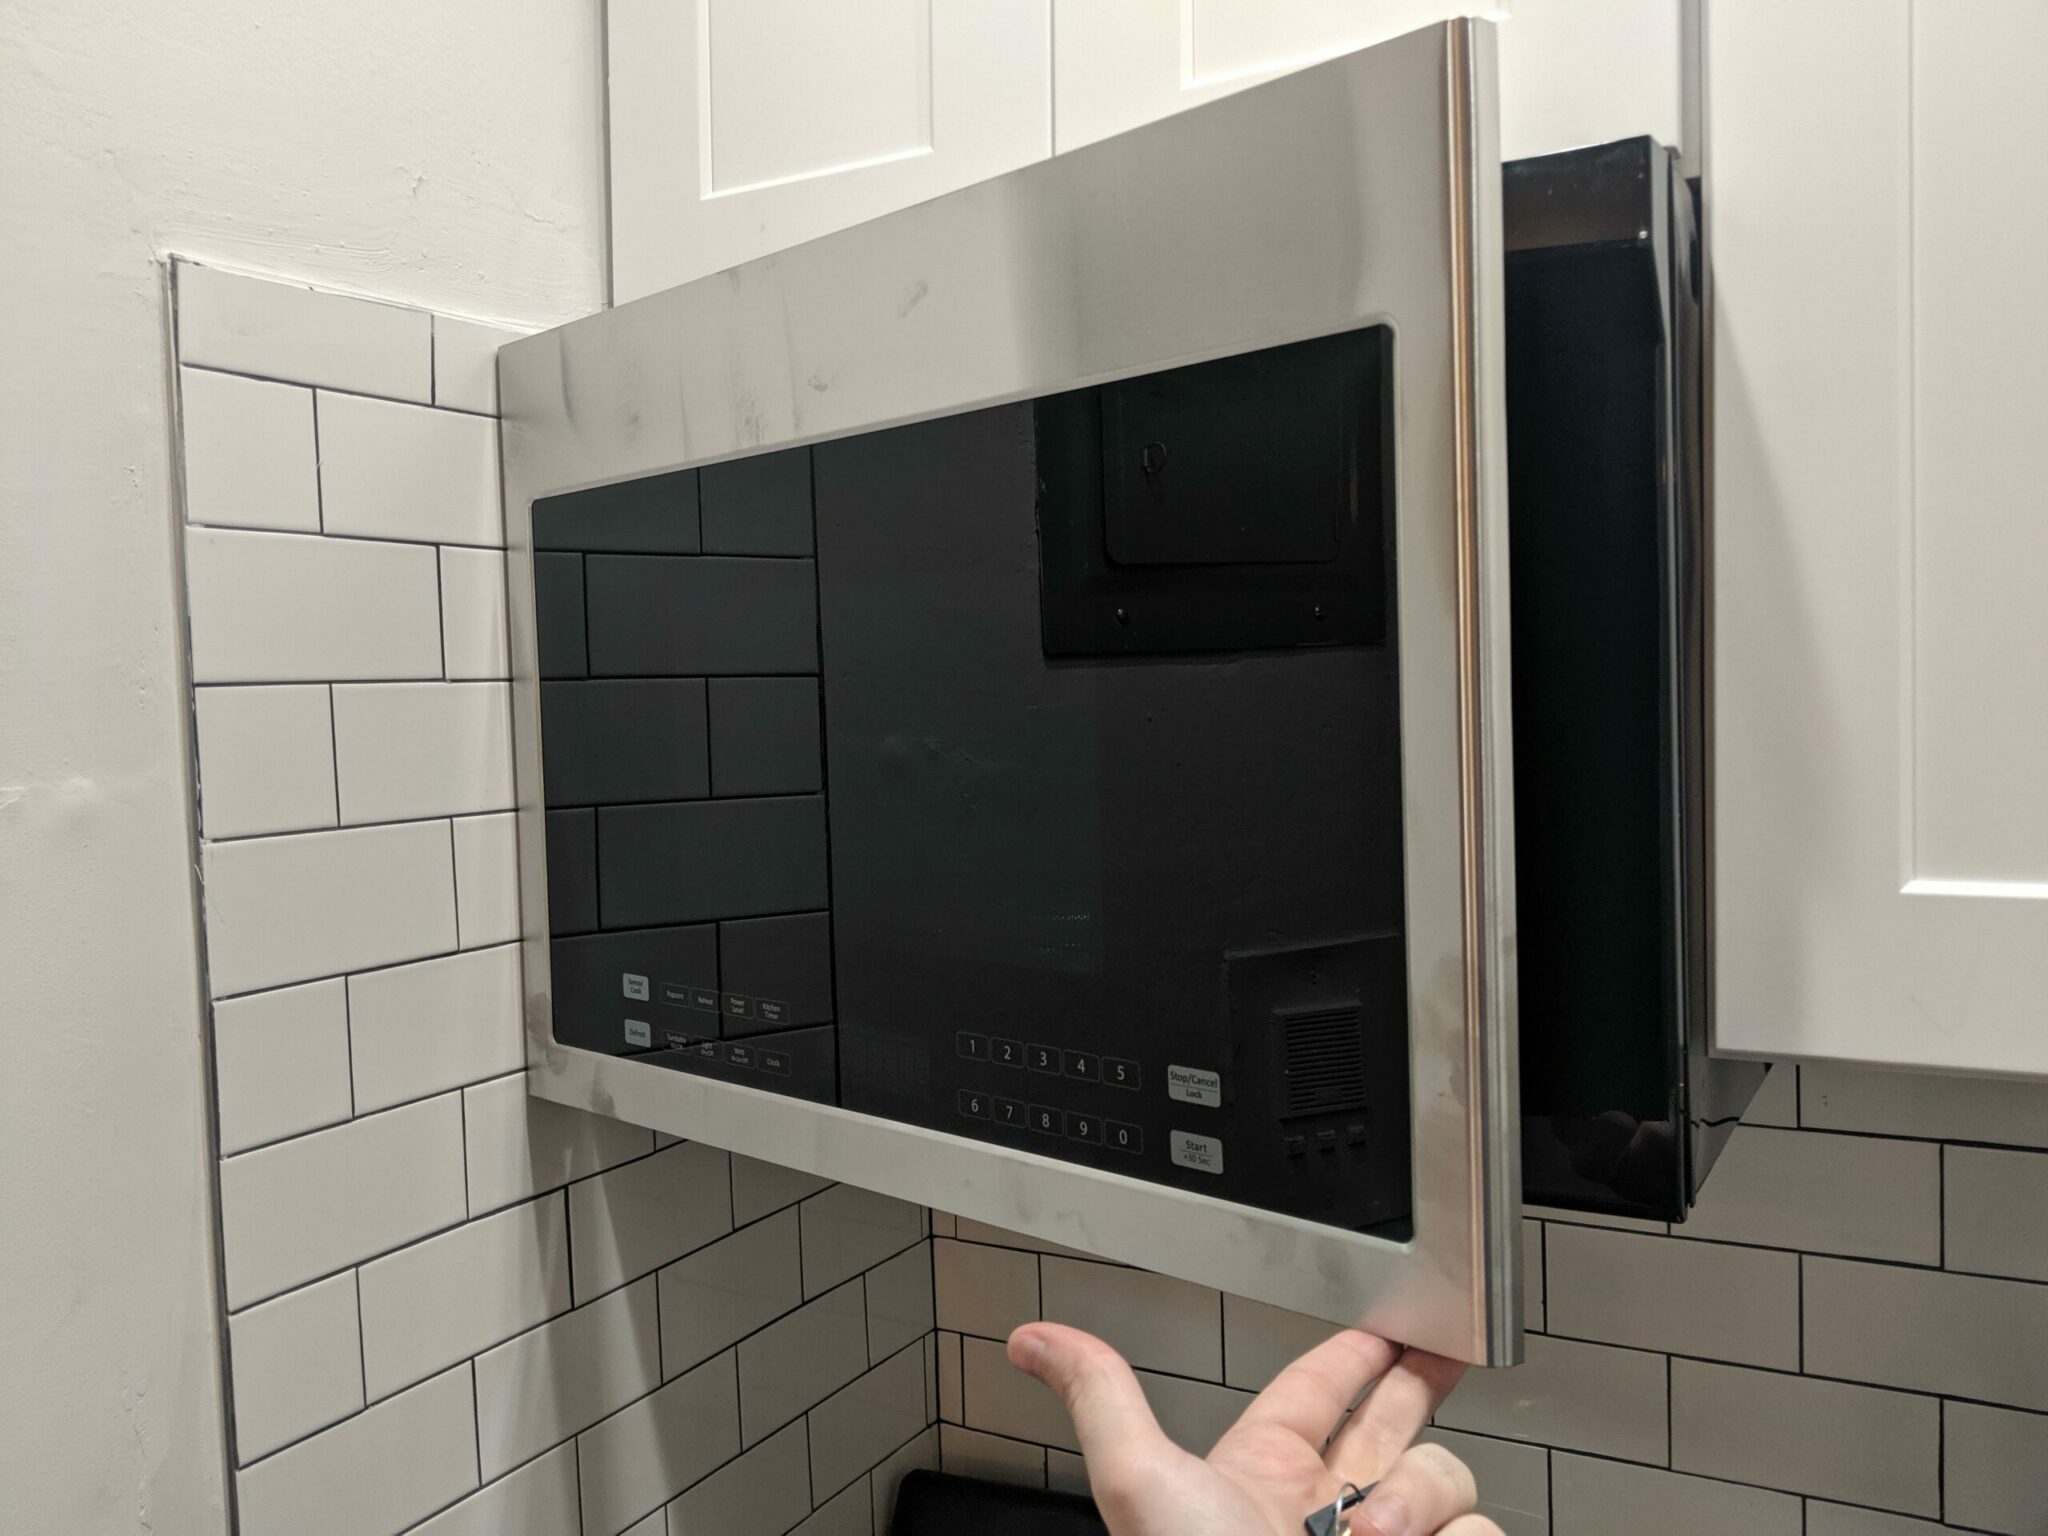 “Landlord hung the microwave, this is as far as it opens before hitting the wall.”